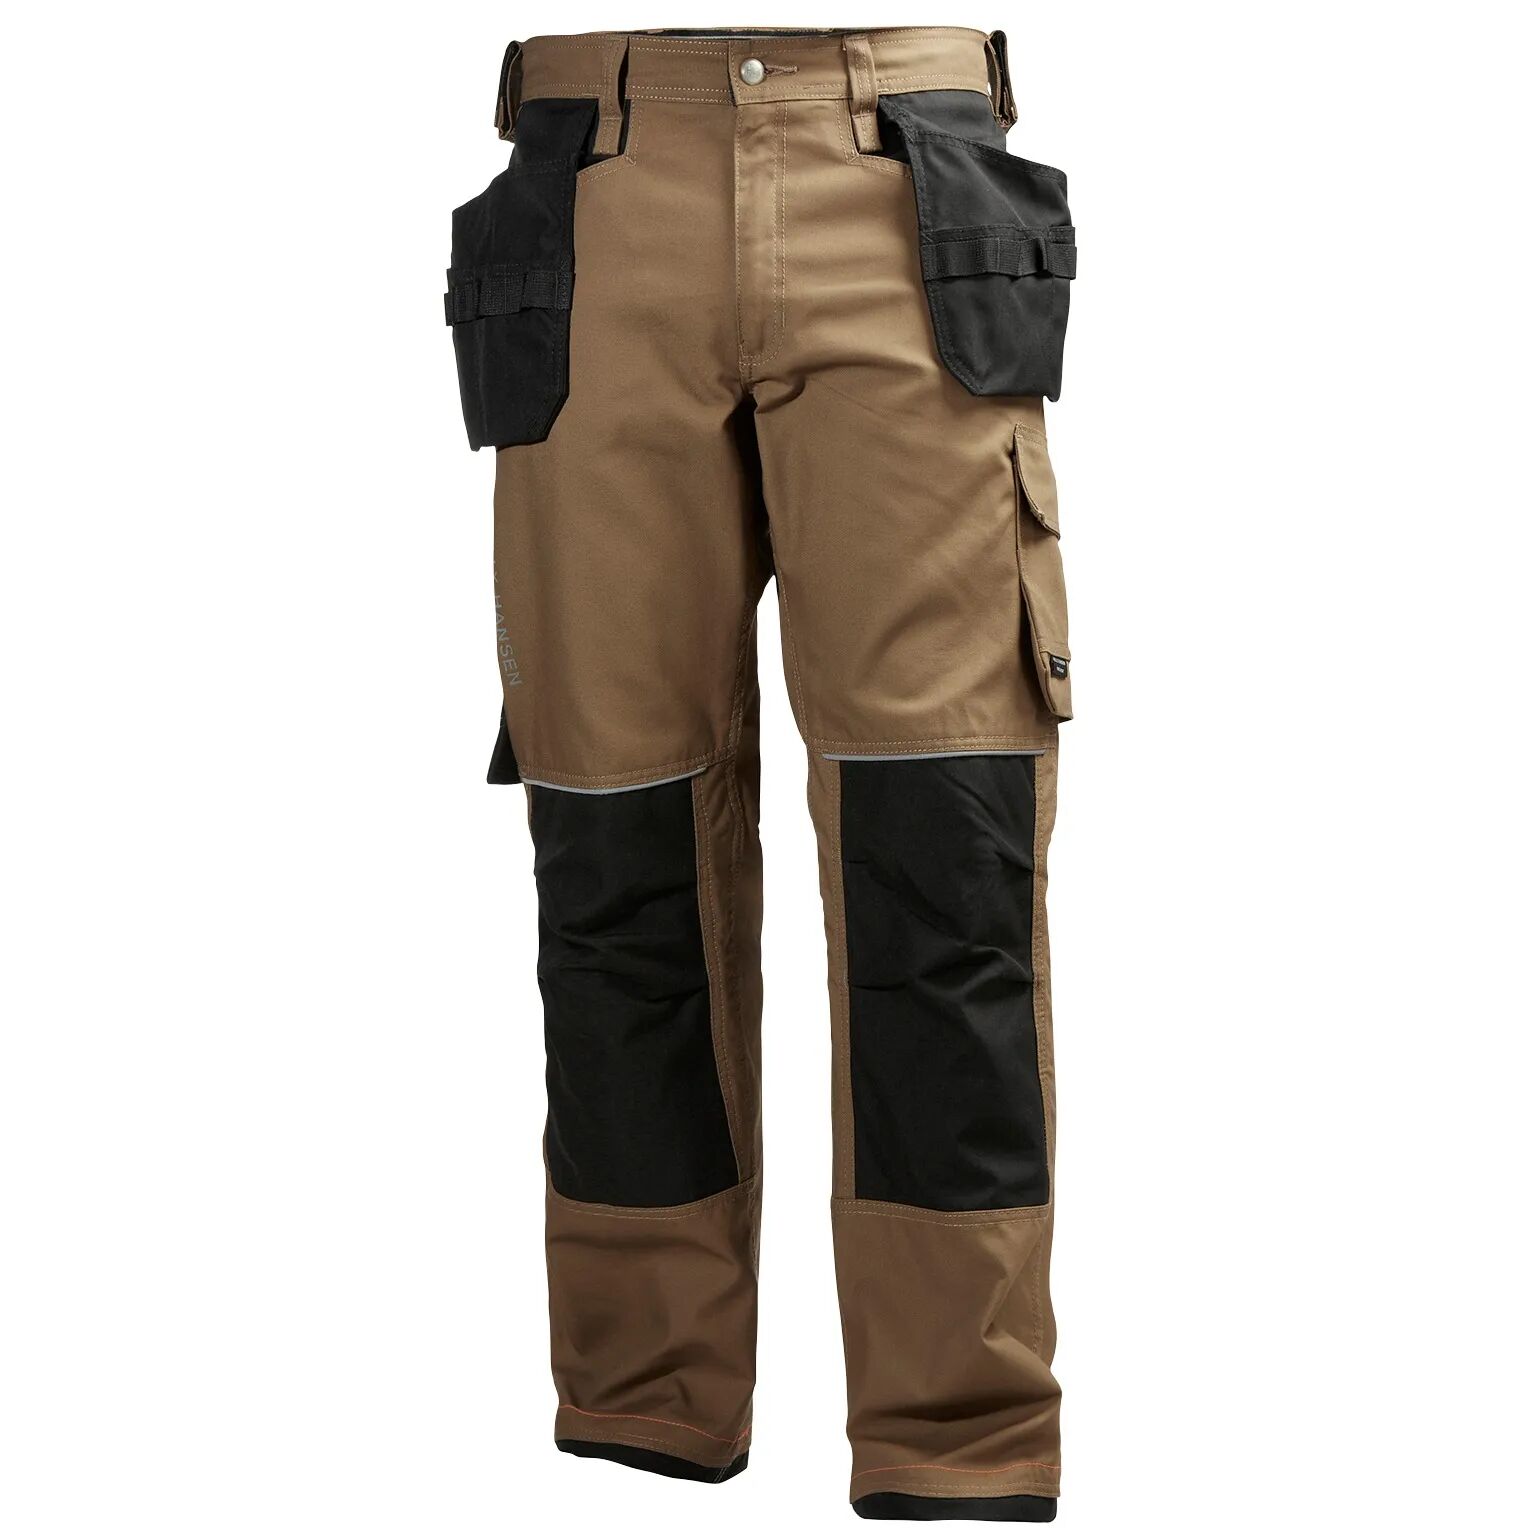 HH Workwear Helly Hansen WorkwearChelsea Durable Reflective Construction Pants Brown 38/32